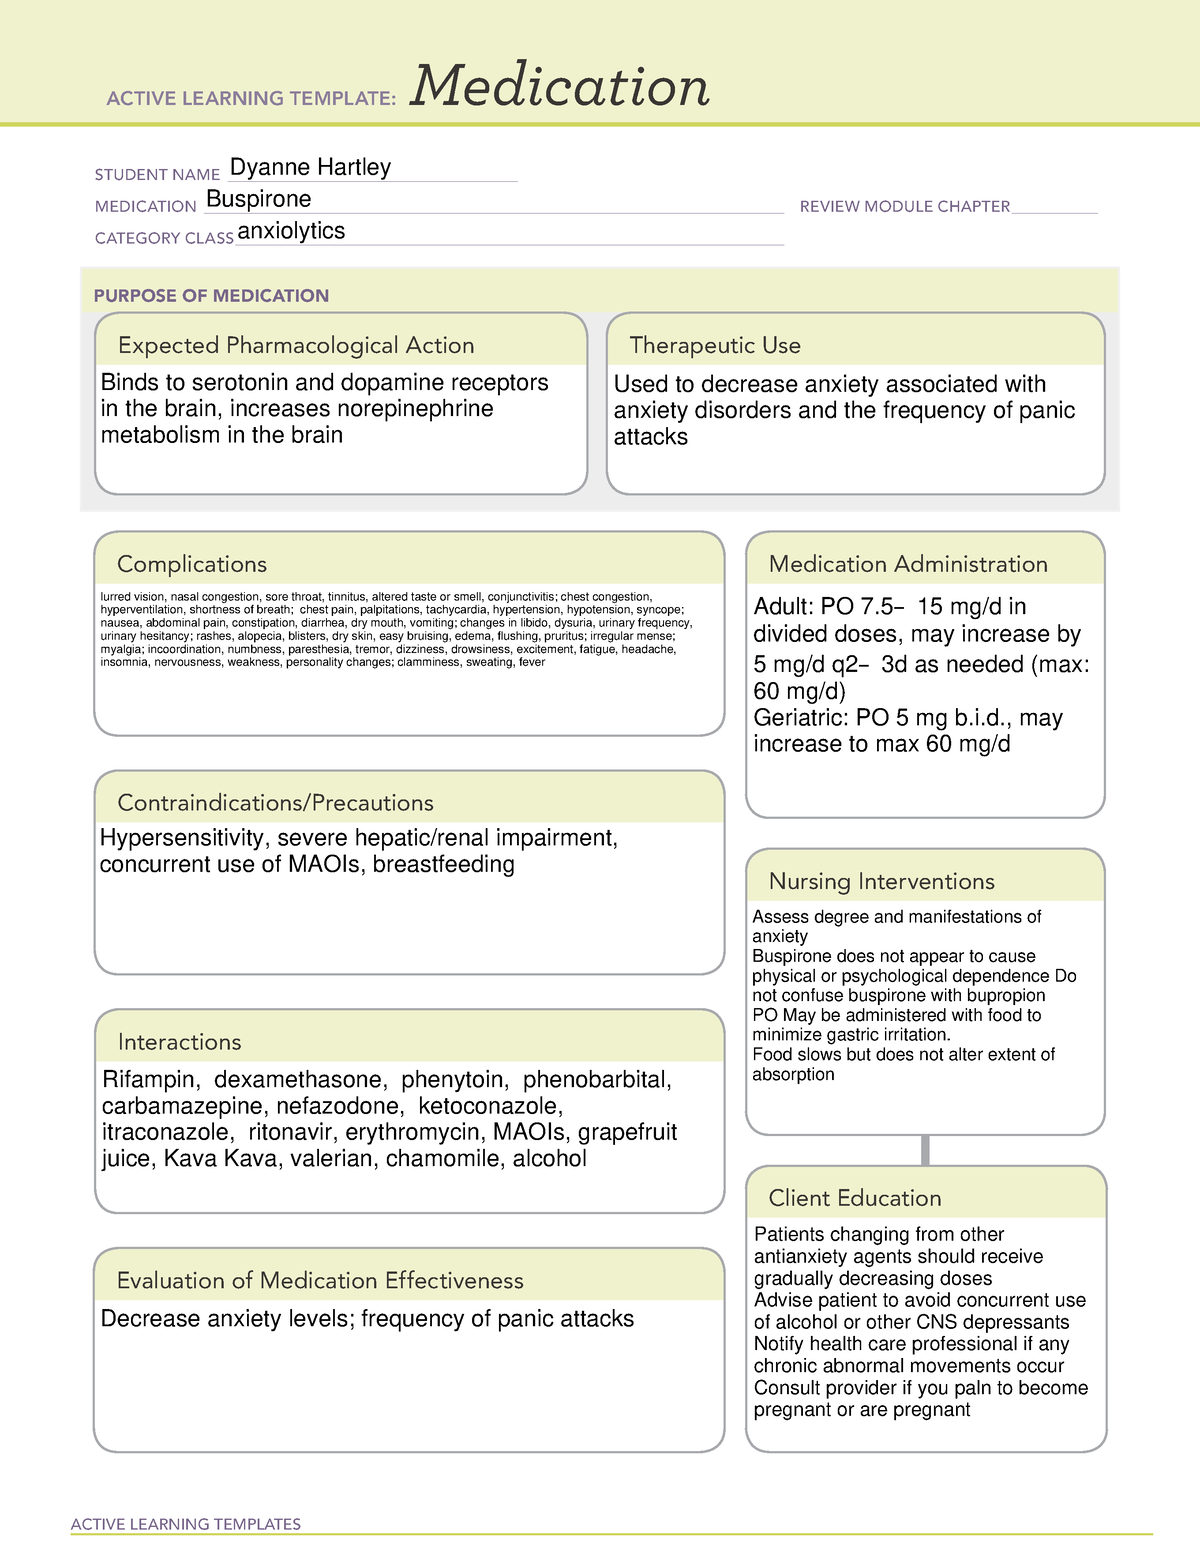 Buspirone ATI Active Learning Templates ACTIVE LEARNING TEMPLATES